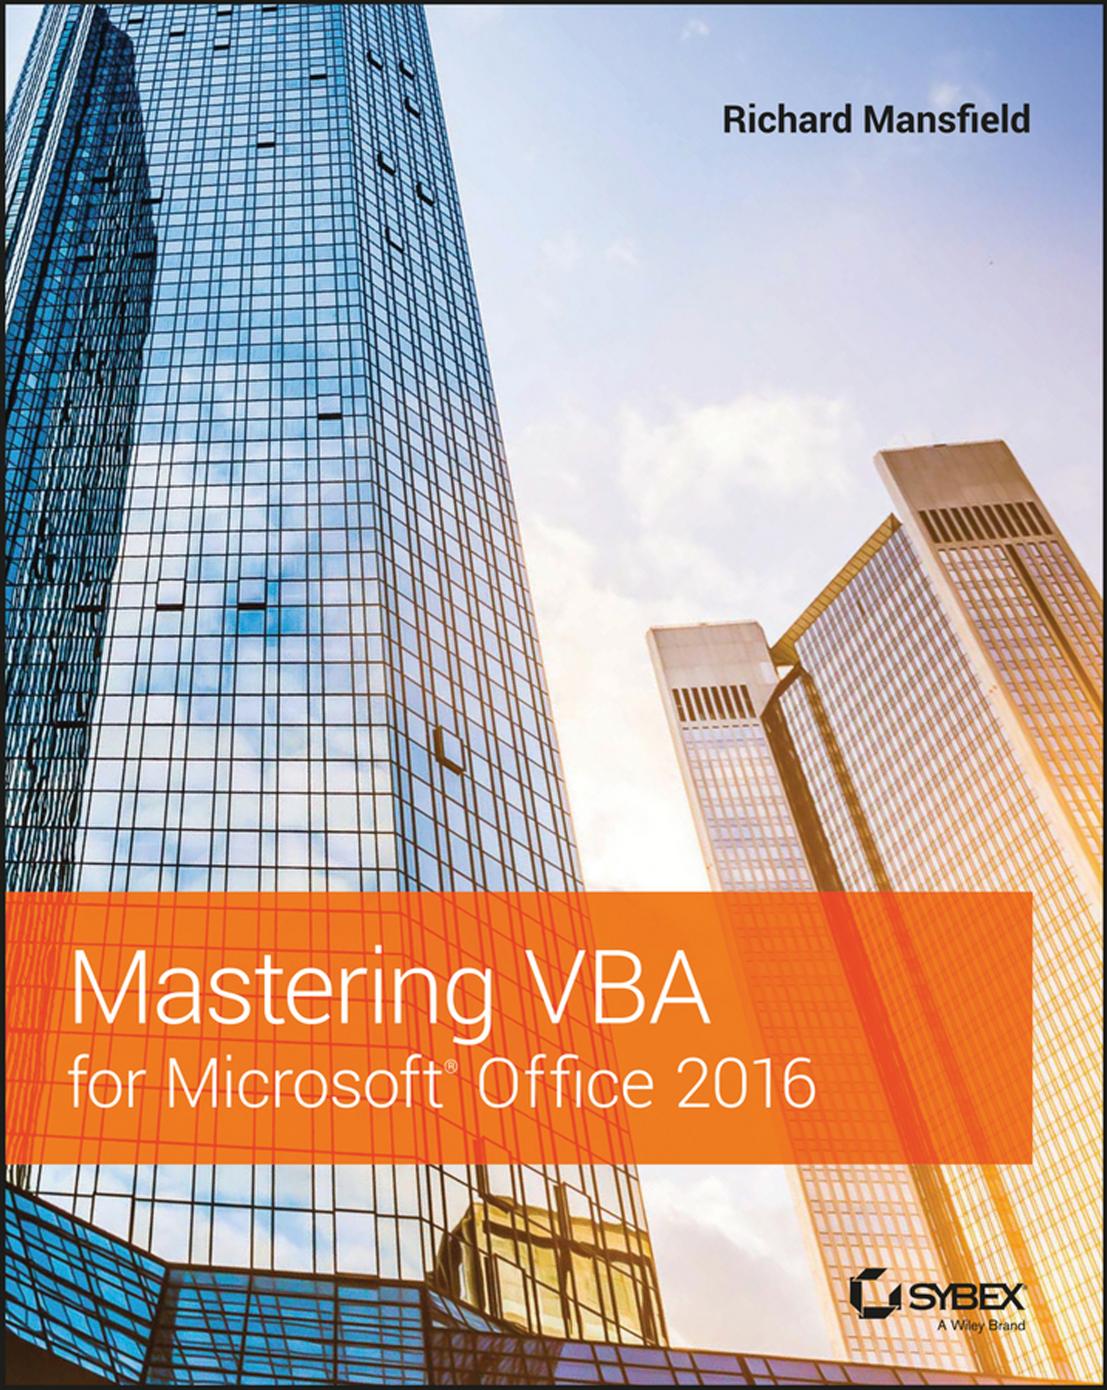 Mastering VBA for Microsoft Office 2016 by Richard Mansfield